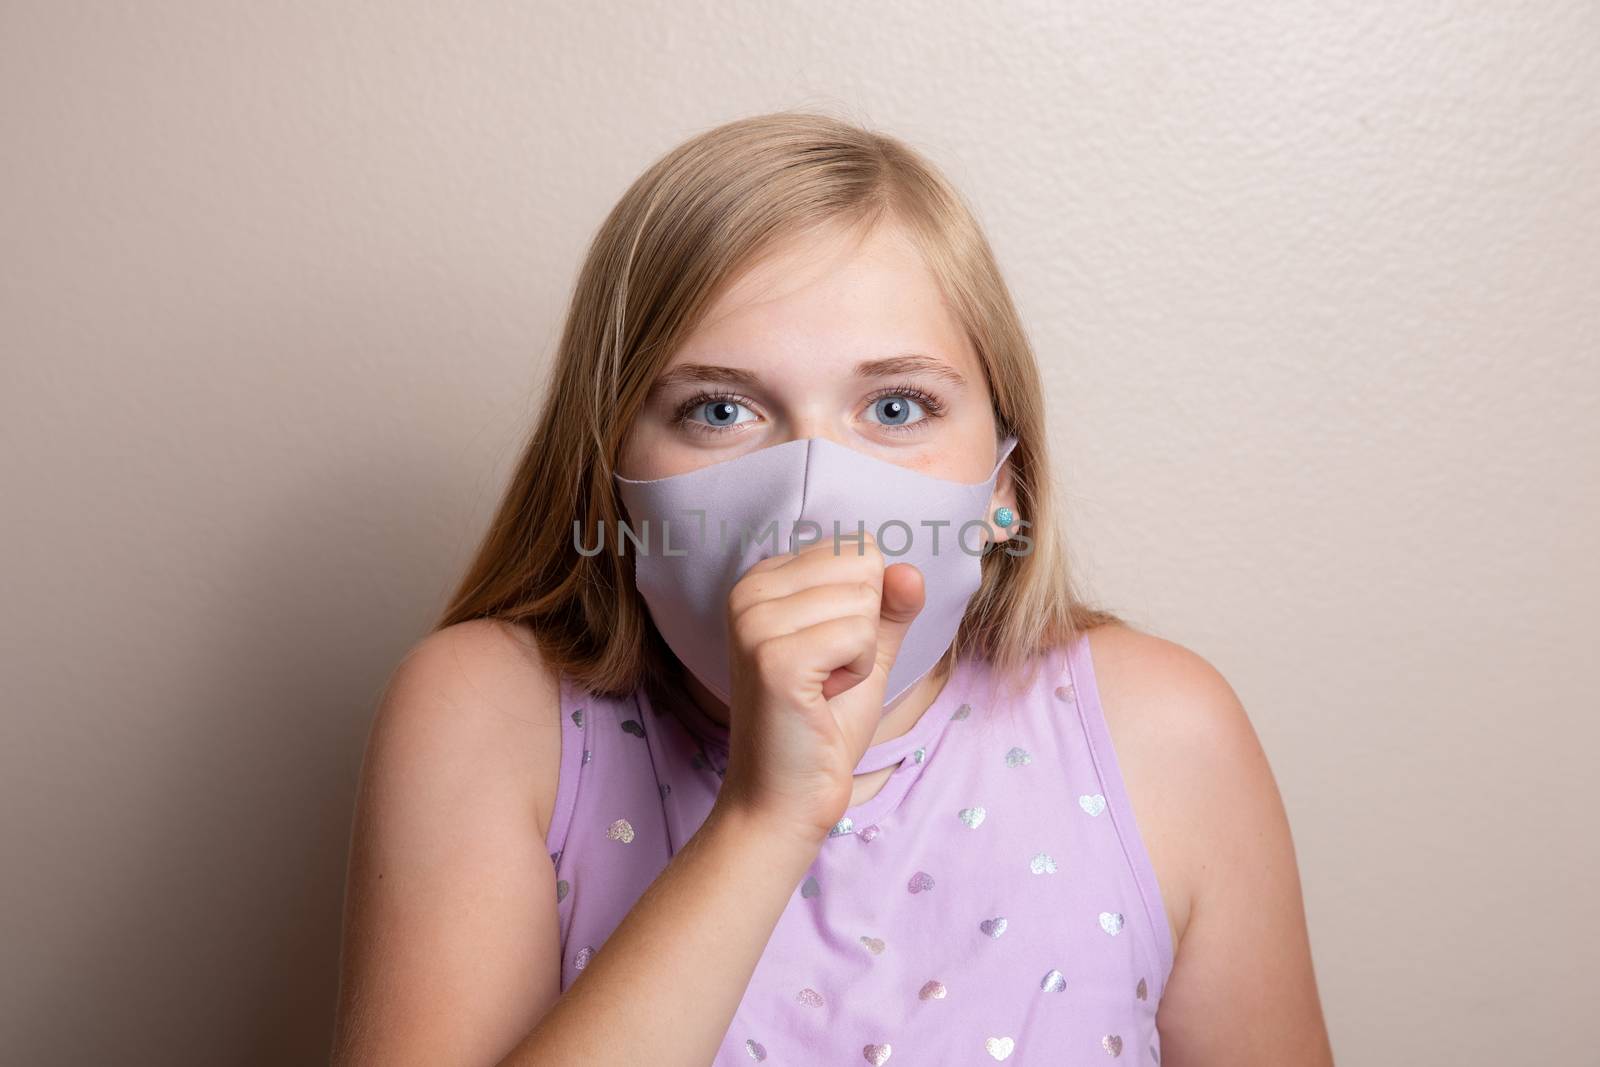 Straight on image of a girl coughing using her hand and a face mask